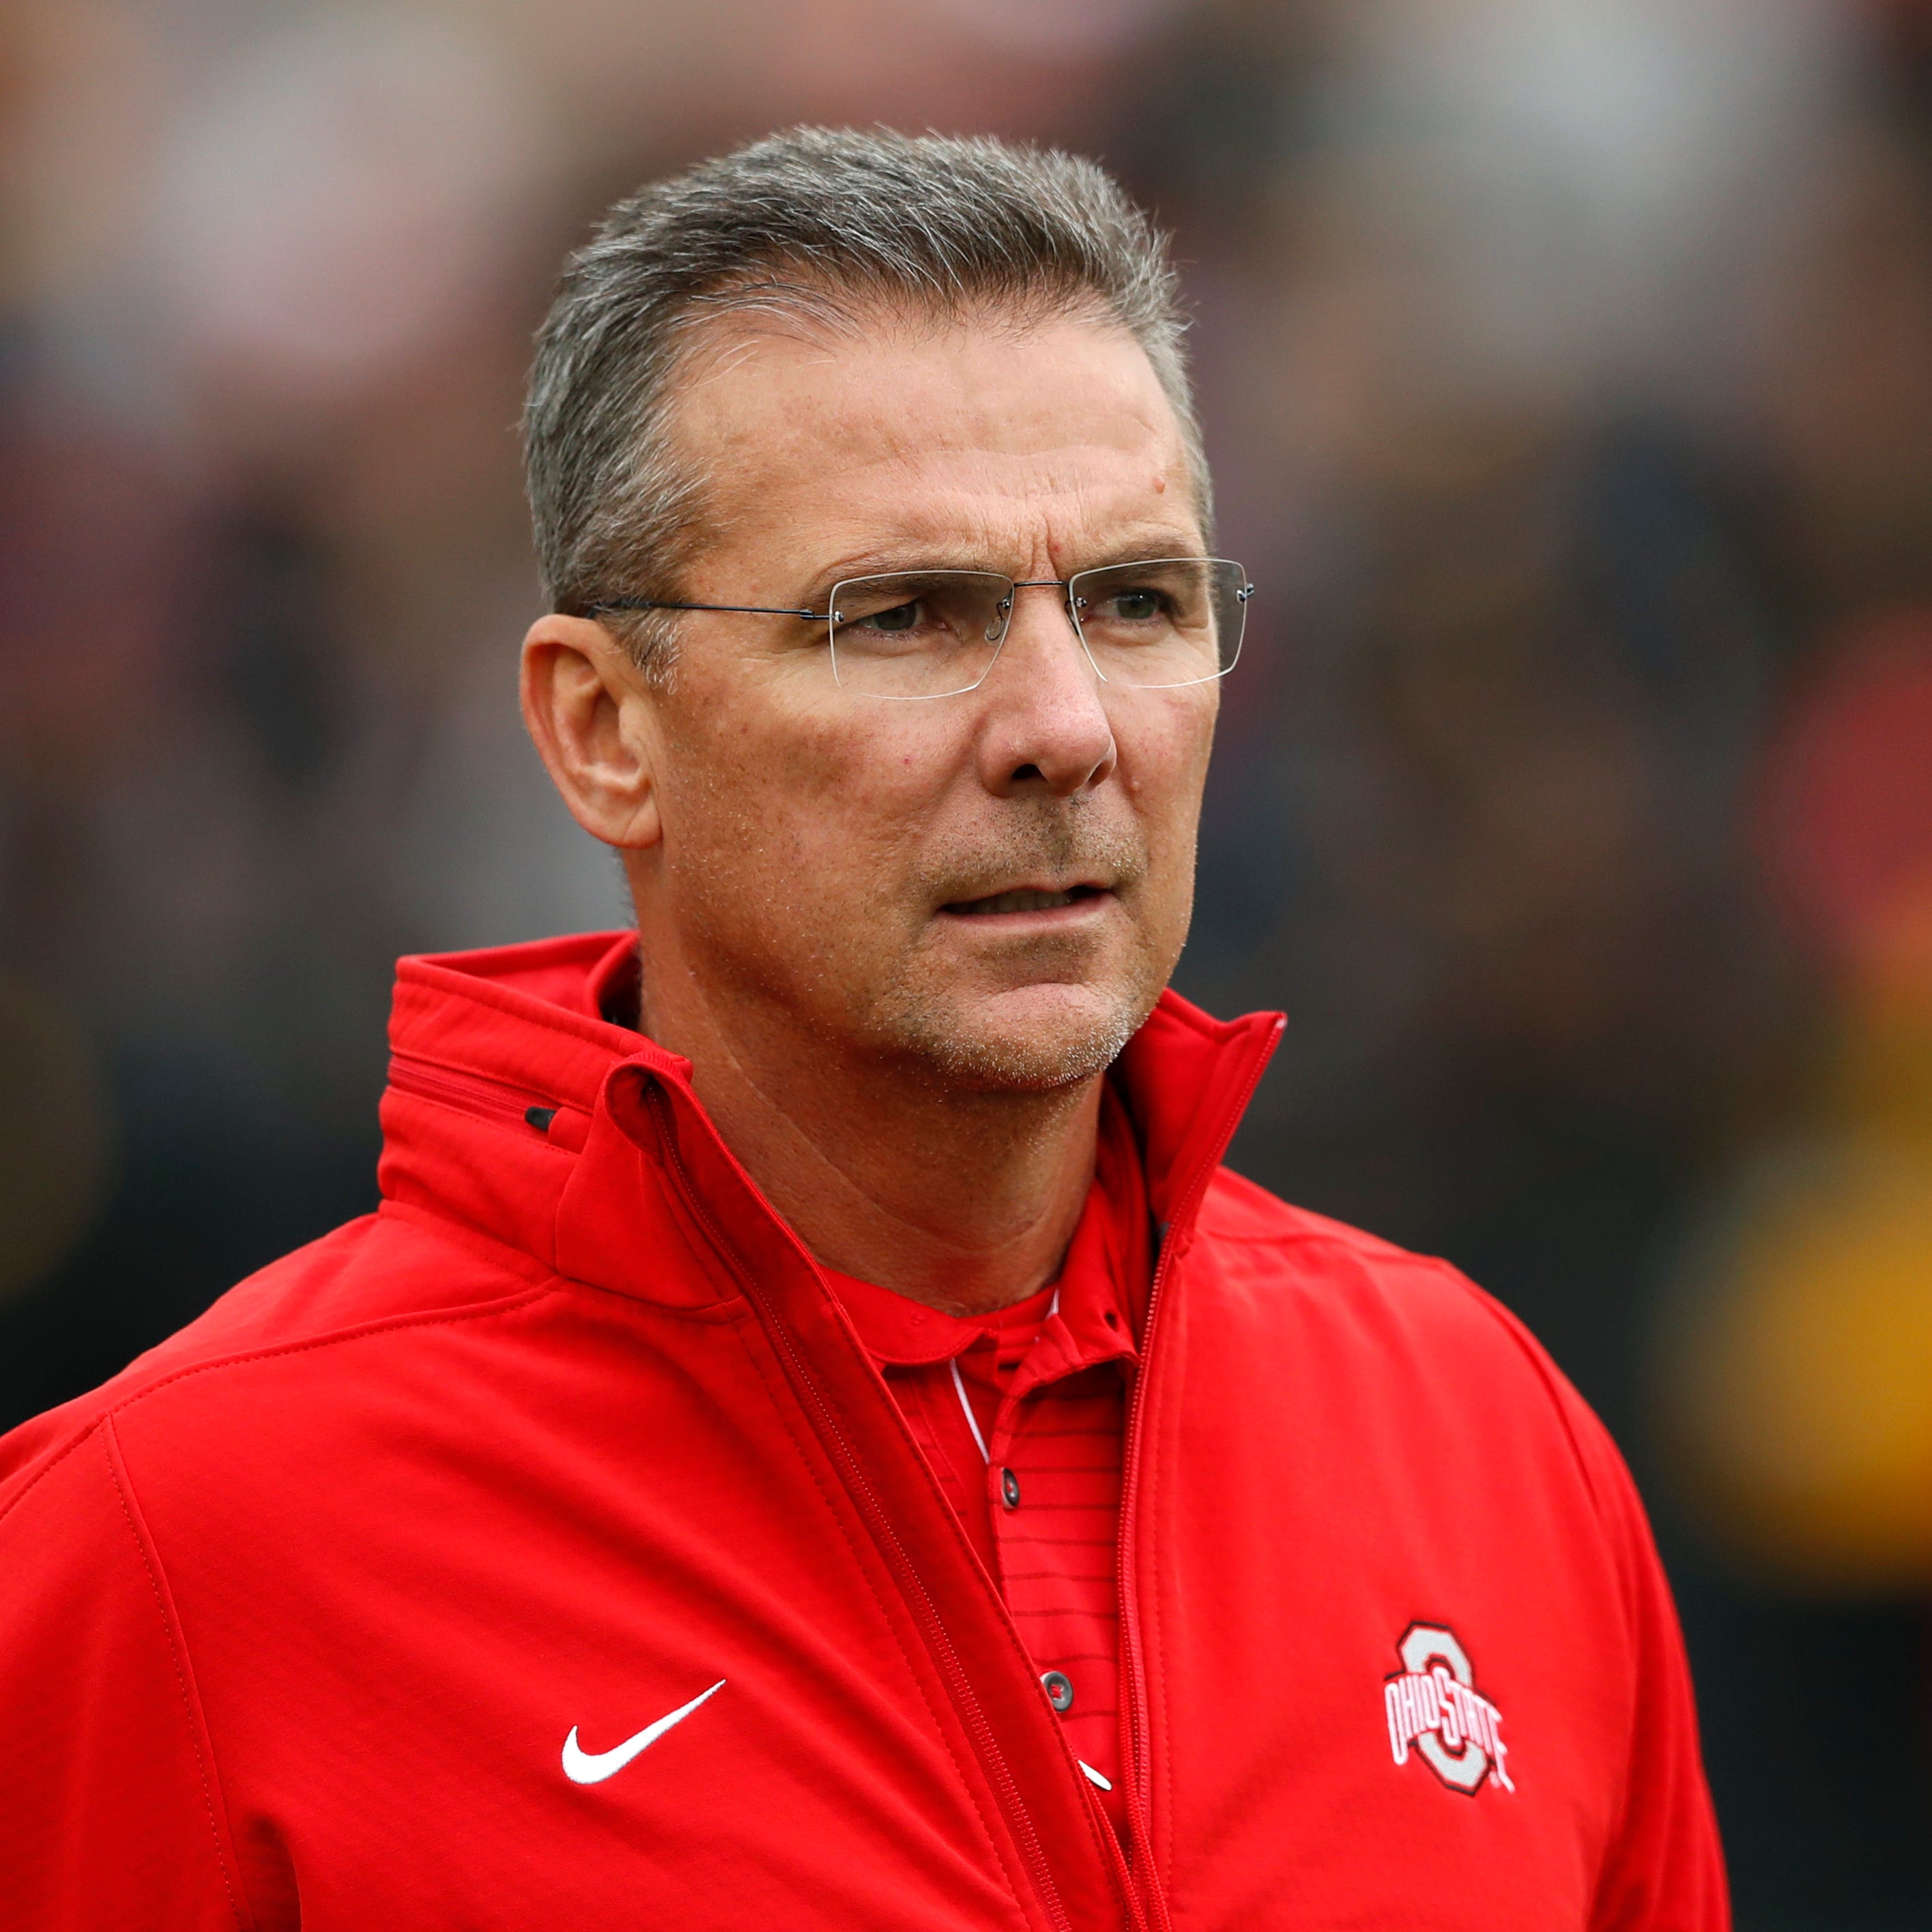 FILE - In this Nov. 4, 2017, file photo, Ohio State head coach Urban Meyer walks on the field before an NCAA college football game against Iowa, in Iowa City, Iowa. Ohio State trustees are set to discuss the future of football coach Urban Meyer. The 